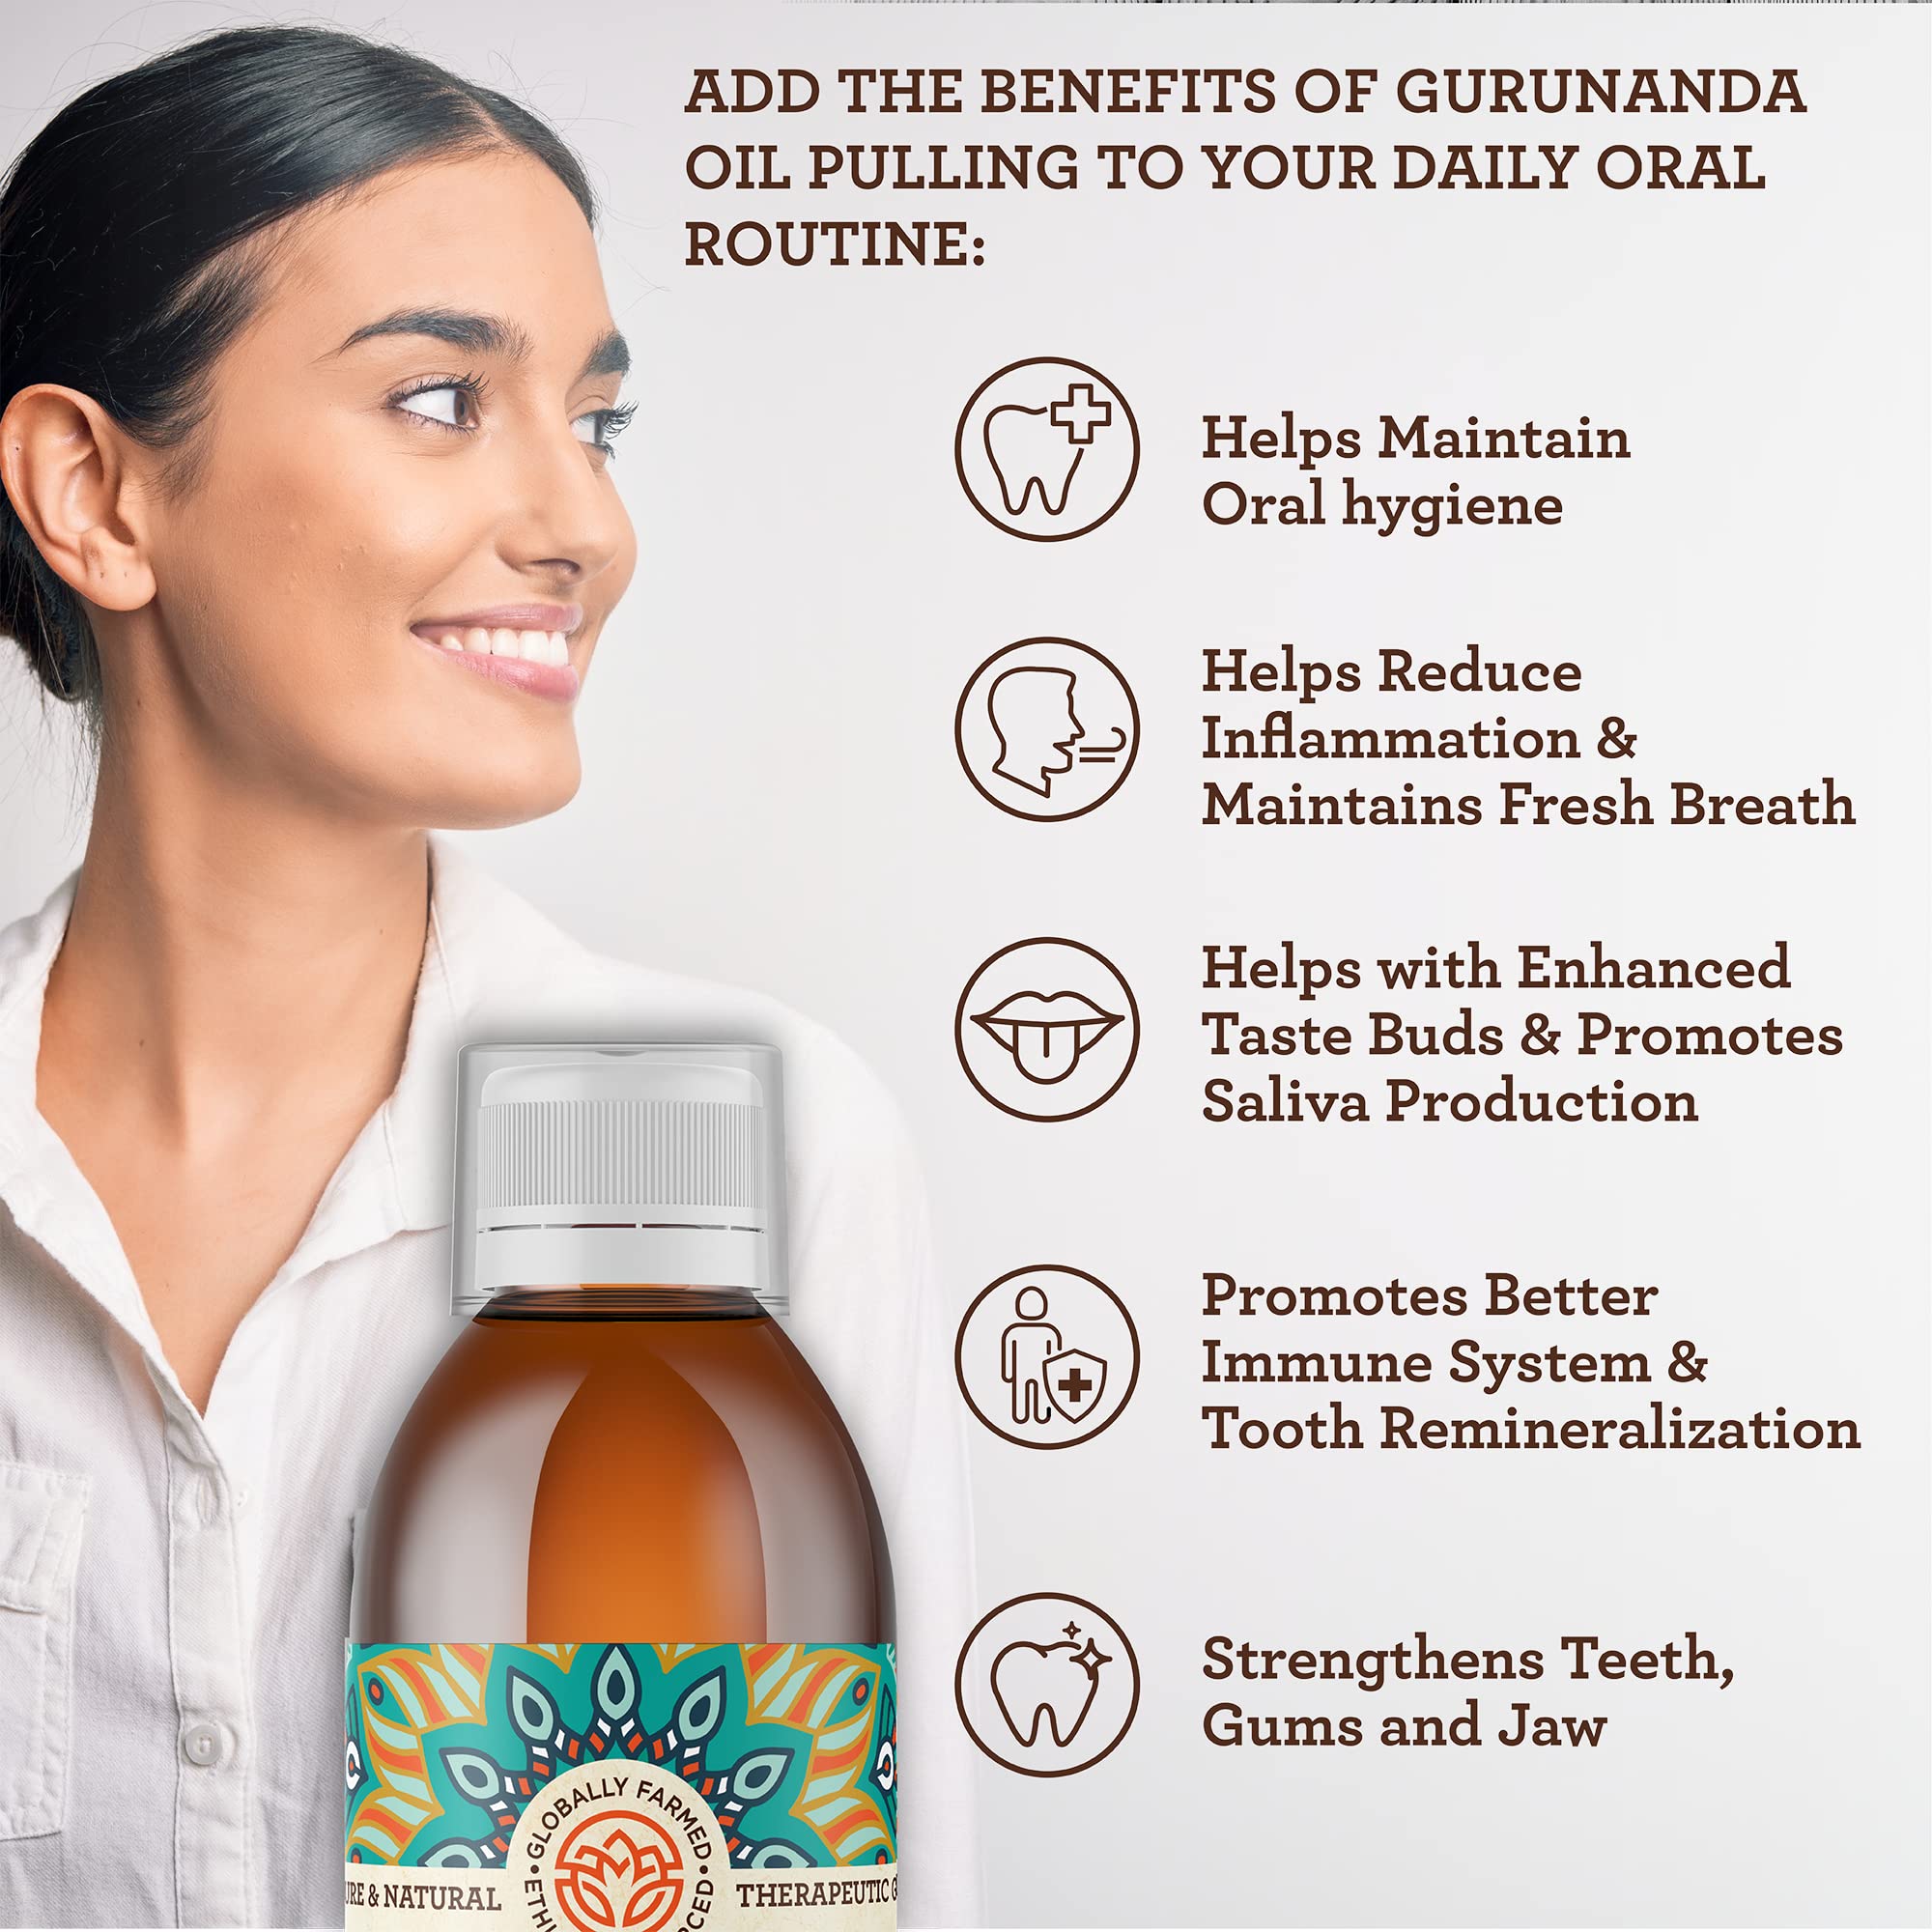 GuruNanda Original Oil Pulling - Alcohol & Fluoride Free, Natural Mouthwash - Ayurvedic Blend for Healthy Teeth & Gums, Natural Teeth Whitening and Fresh Breath - Unflavoured Oral Rinse (8.45 fl.oz)